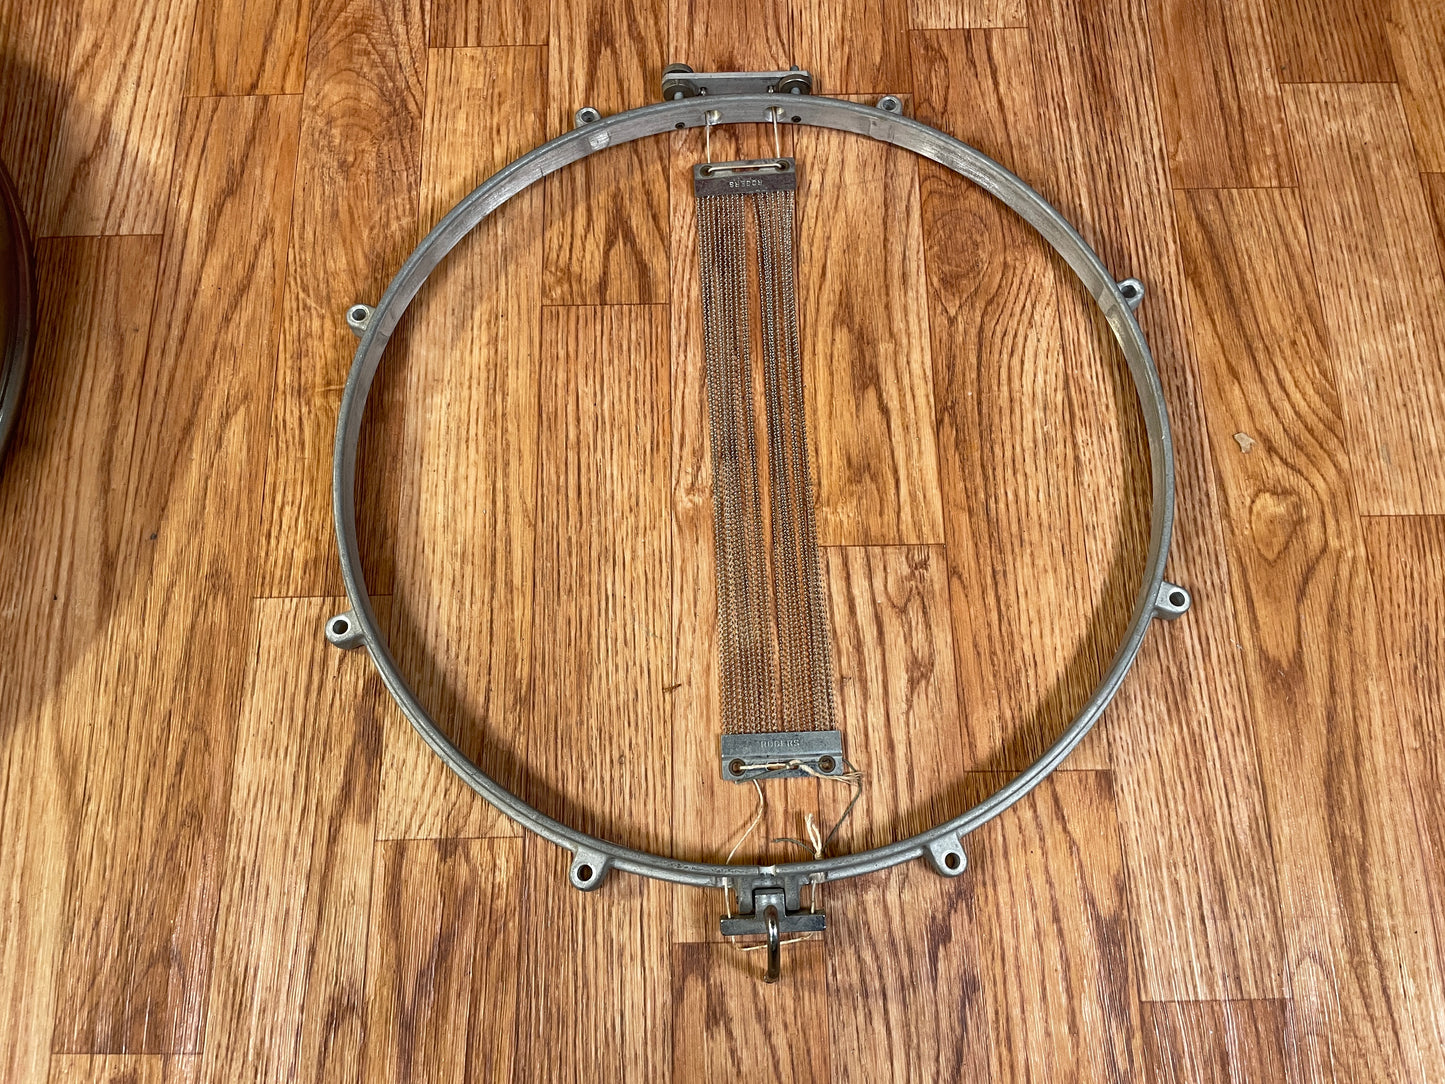 Vintage Ralph Kester 16" Flat Jacks Marching Snare Drum for Project / Parts